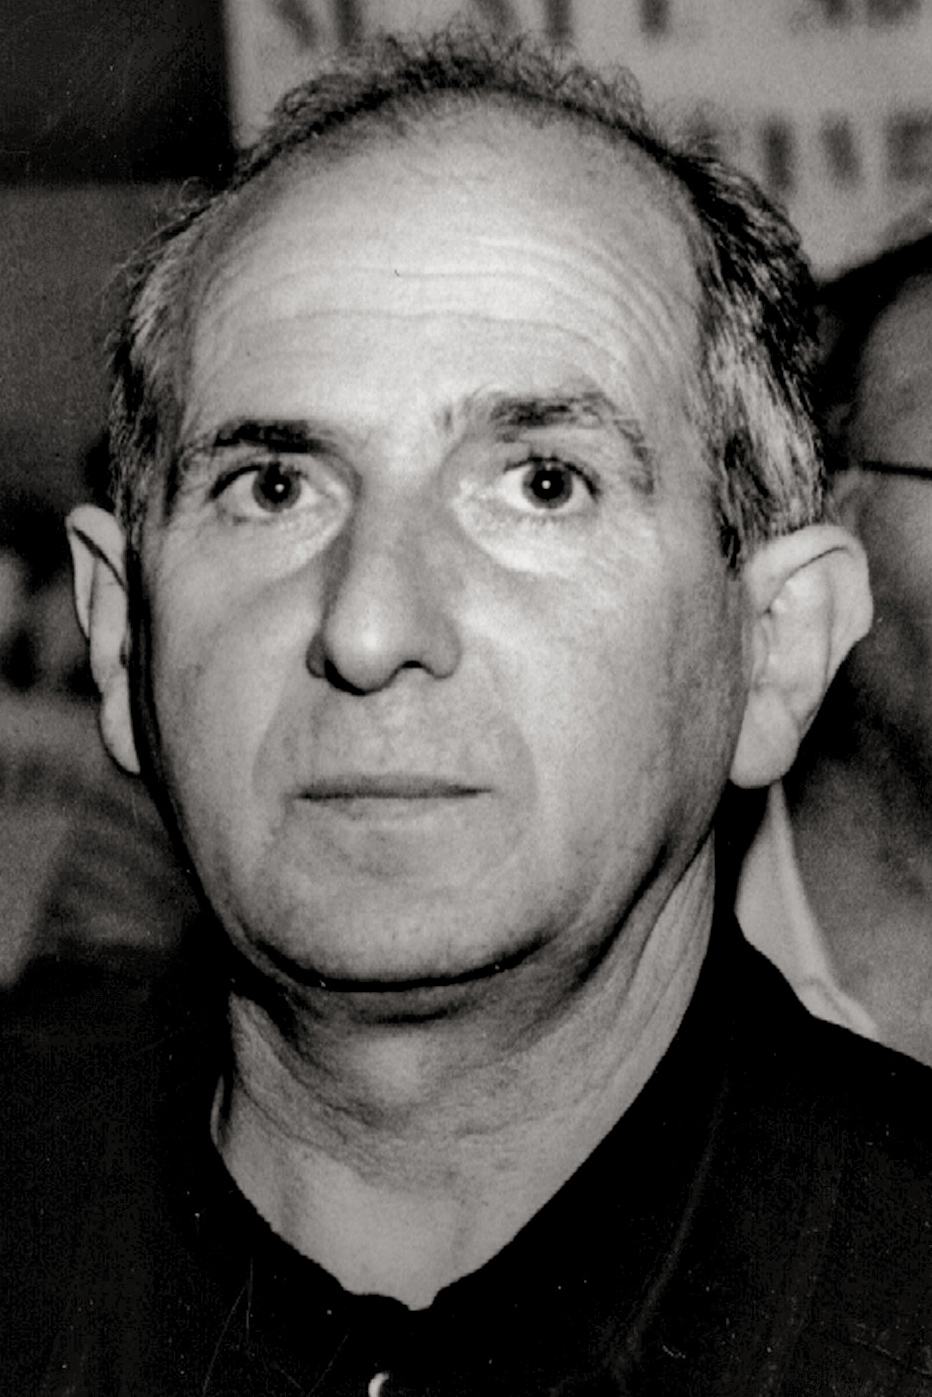 An undated photo of Father Pino Puglisi, who was killed by the Mafia for his evangelic and social fight against Cosa Nostra.Enzo Brai—Mondadori Portfolio/Getty Images (Enzo Brai—Mondadori Portfolio/Getty Images)